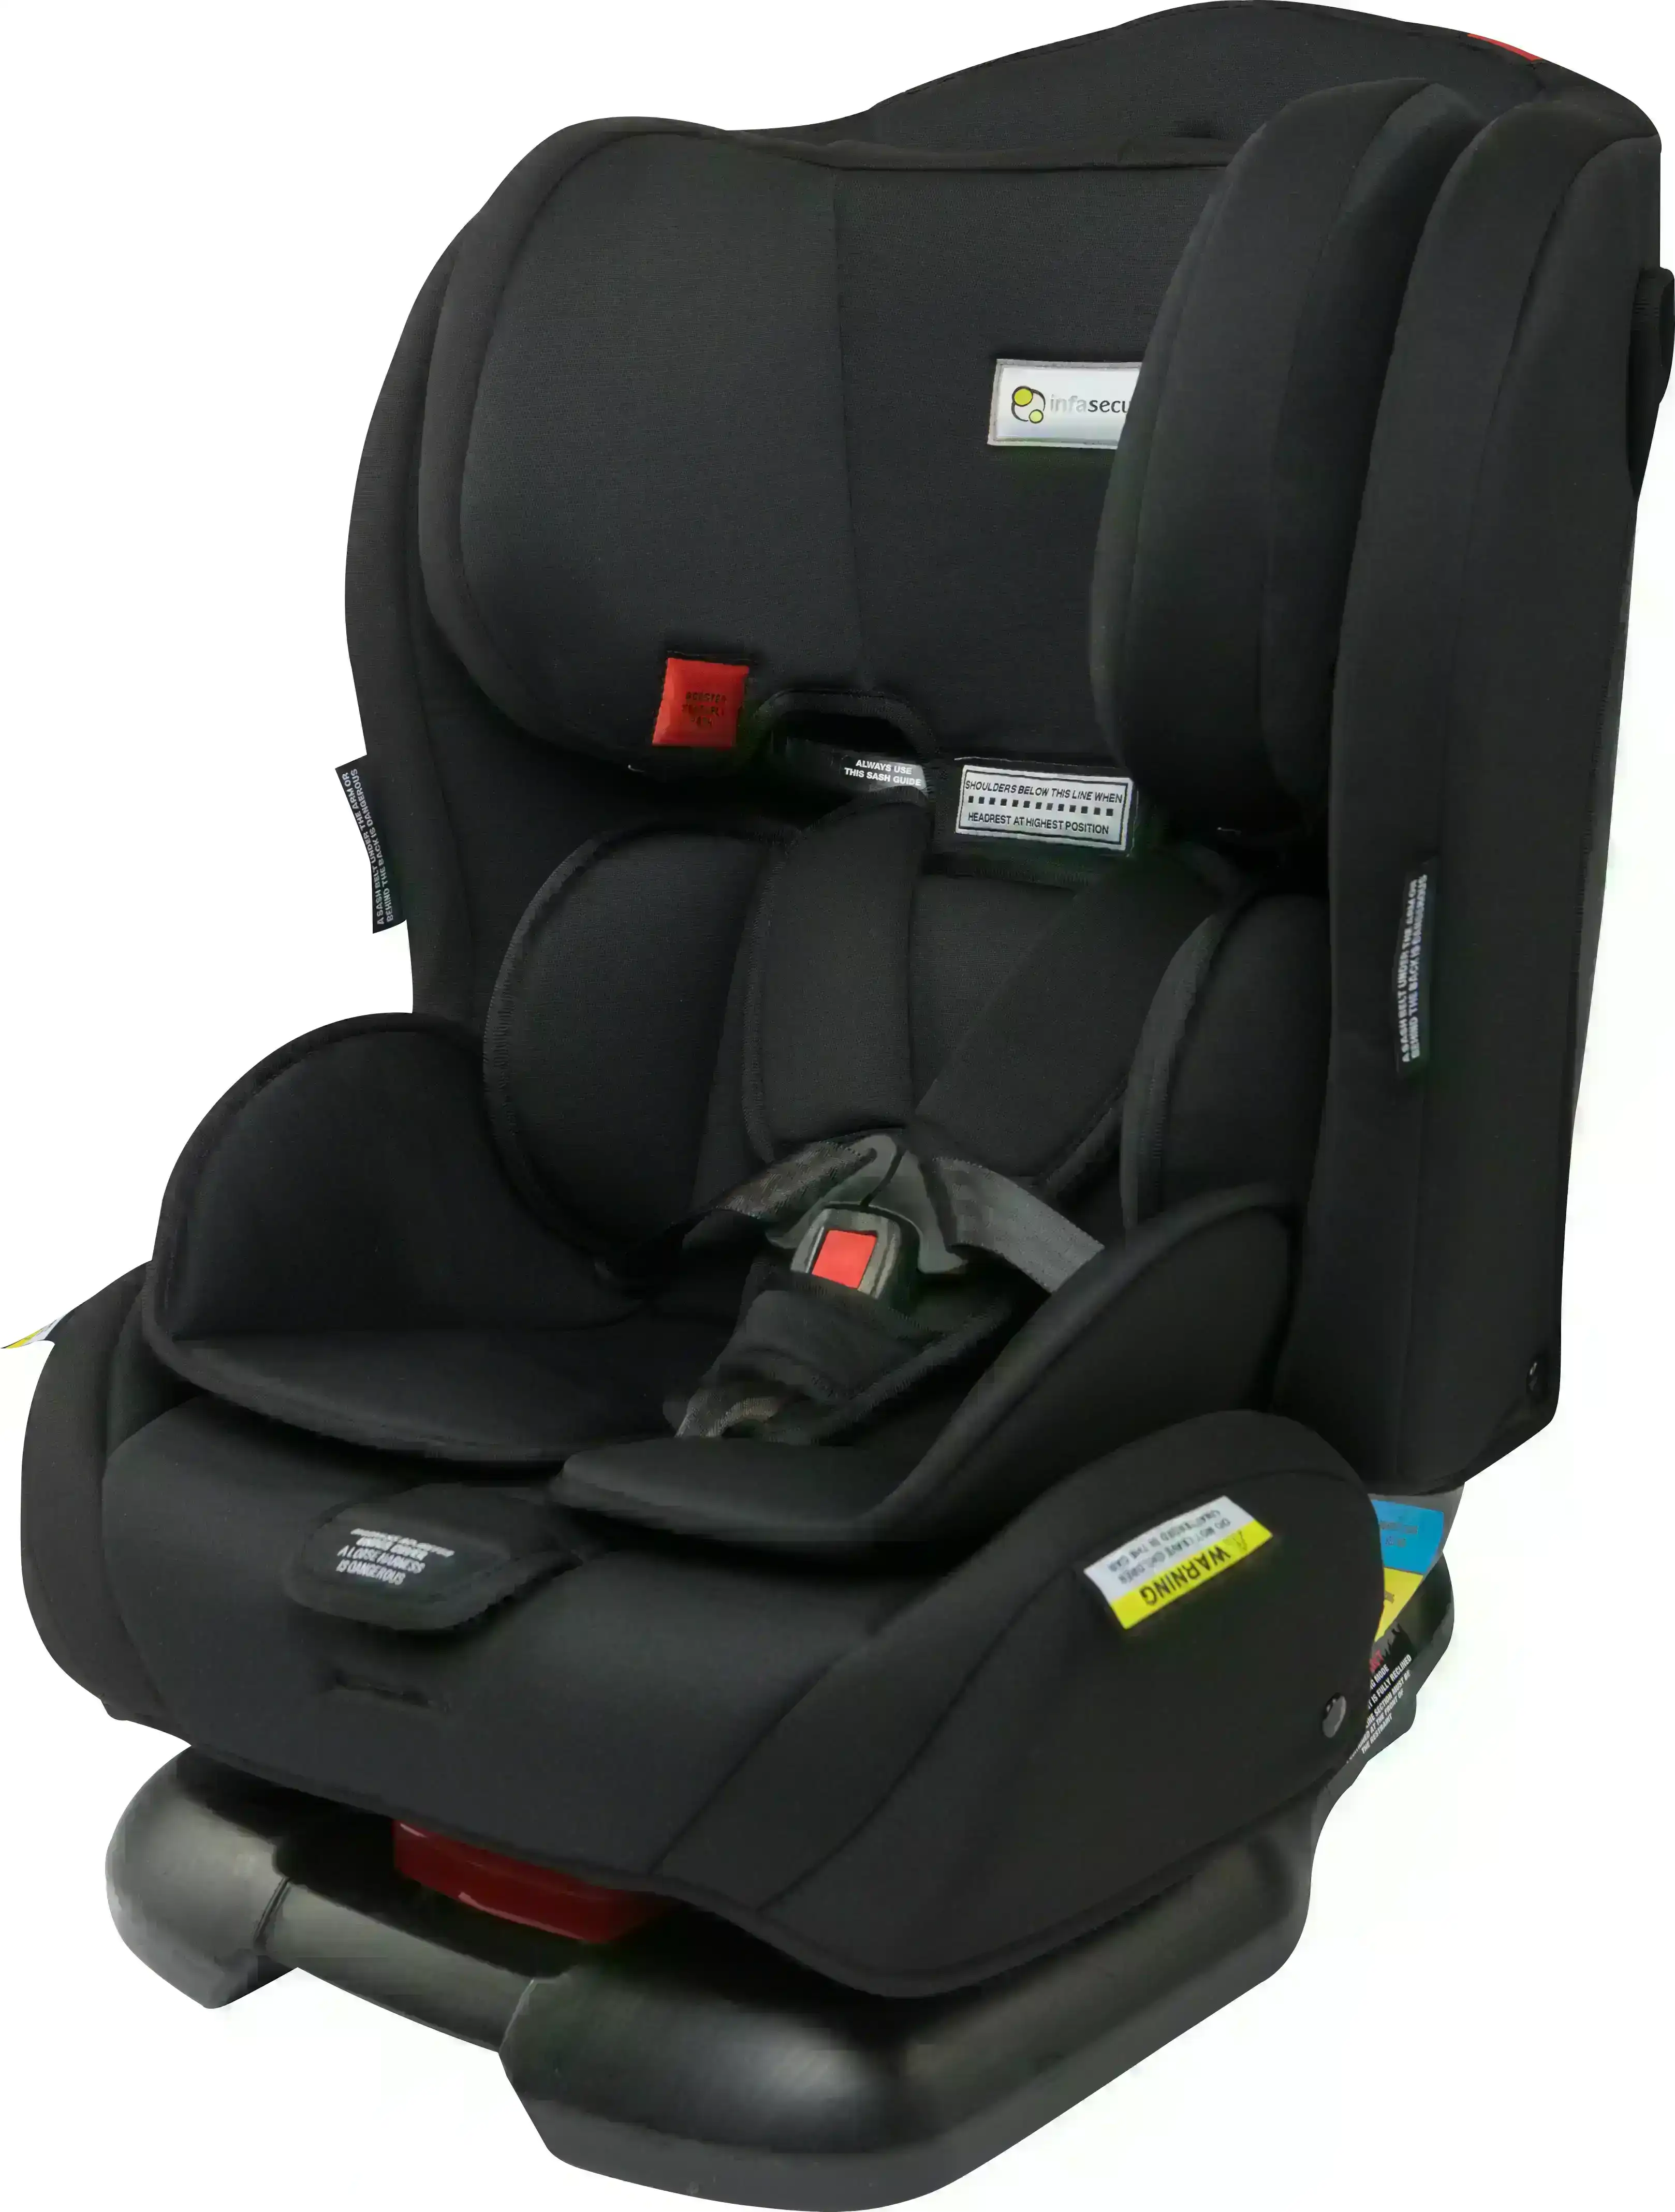 Infasecure Legacy (Black) Convertible Car Seat